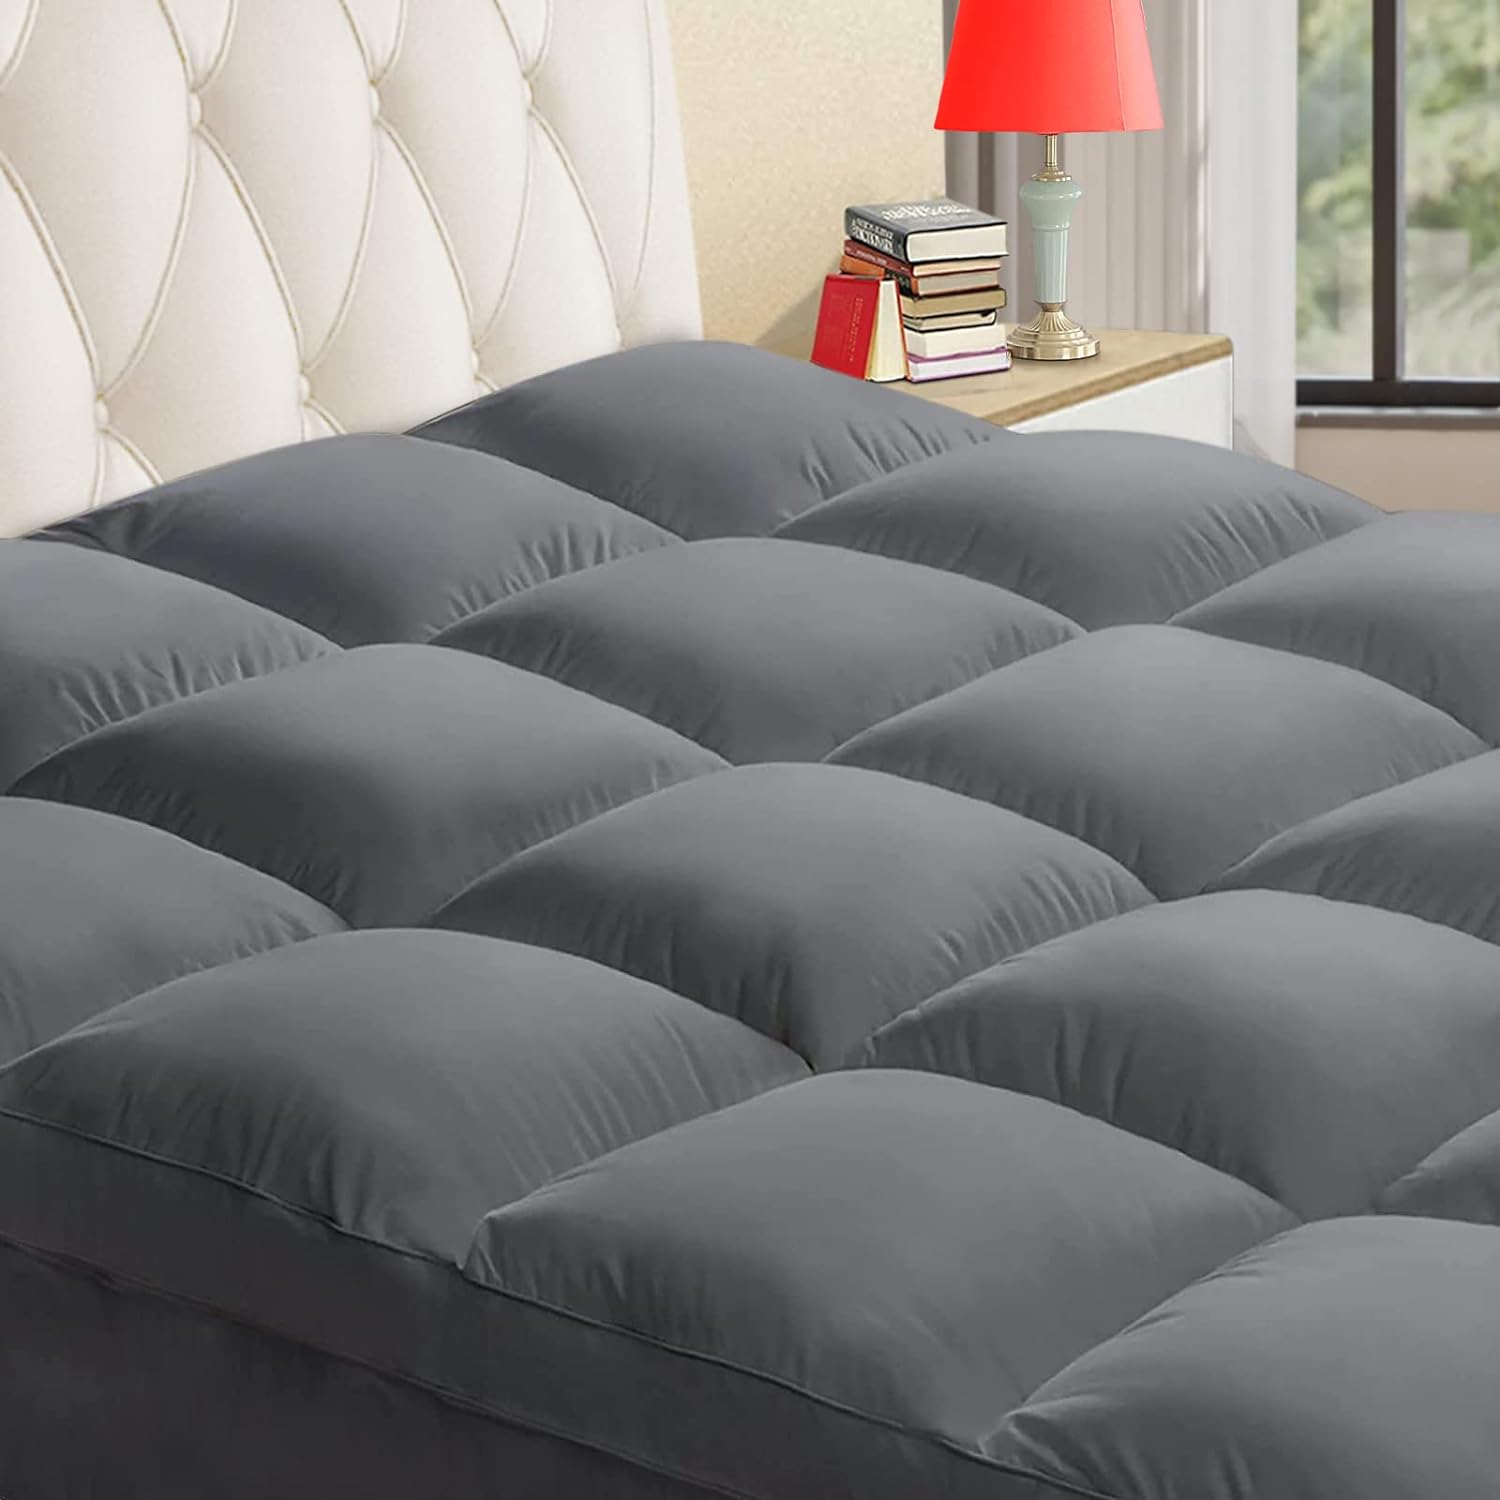 So glad I got this for my futon. My futon mattress is stiff, and heavy, but with this addition, it sleeps with some extra softness. It works great, and feels great to sleep on. It' easy to put on and it protects my mattress too.